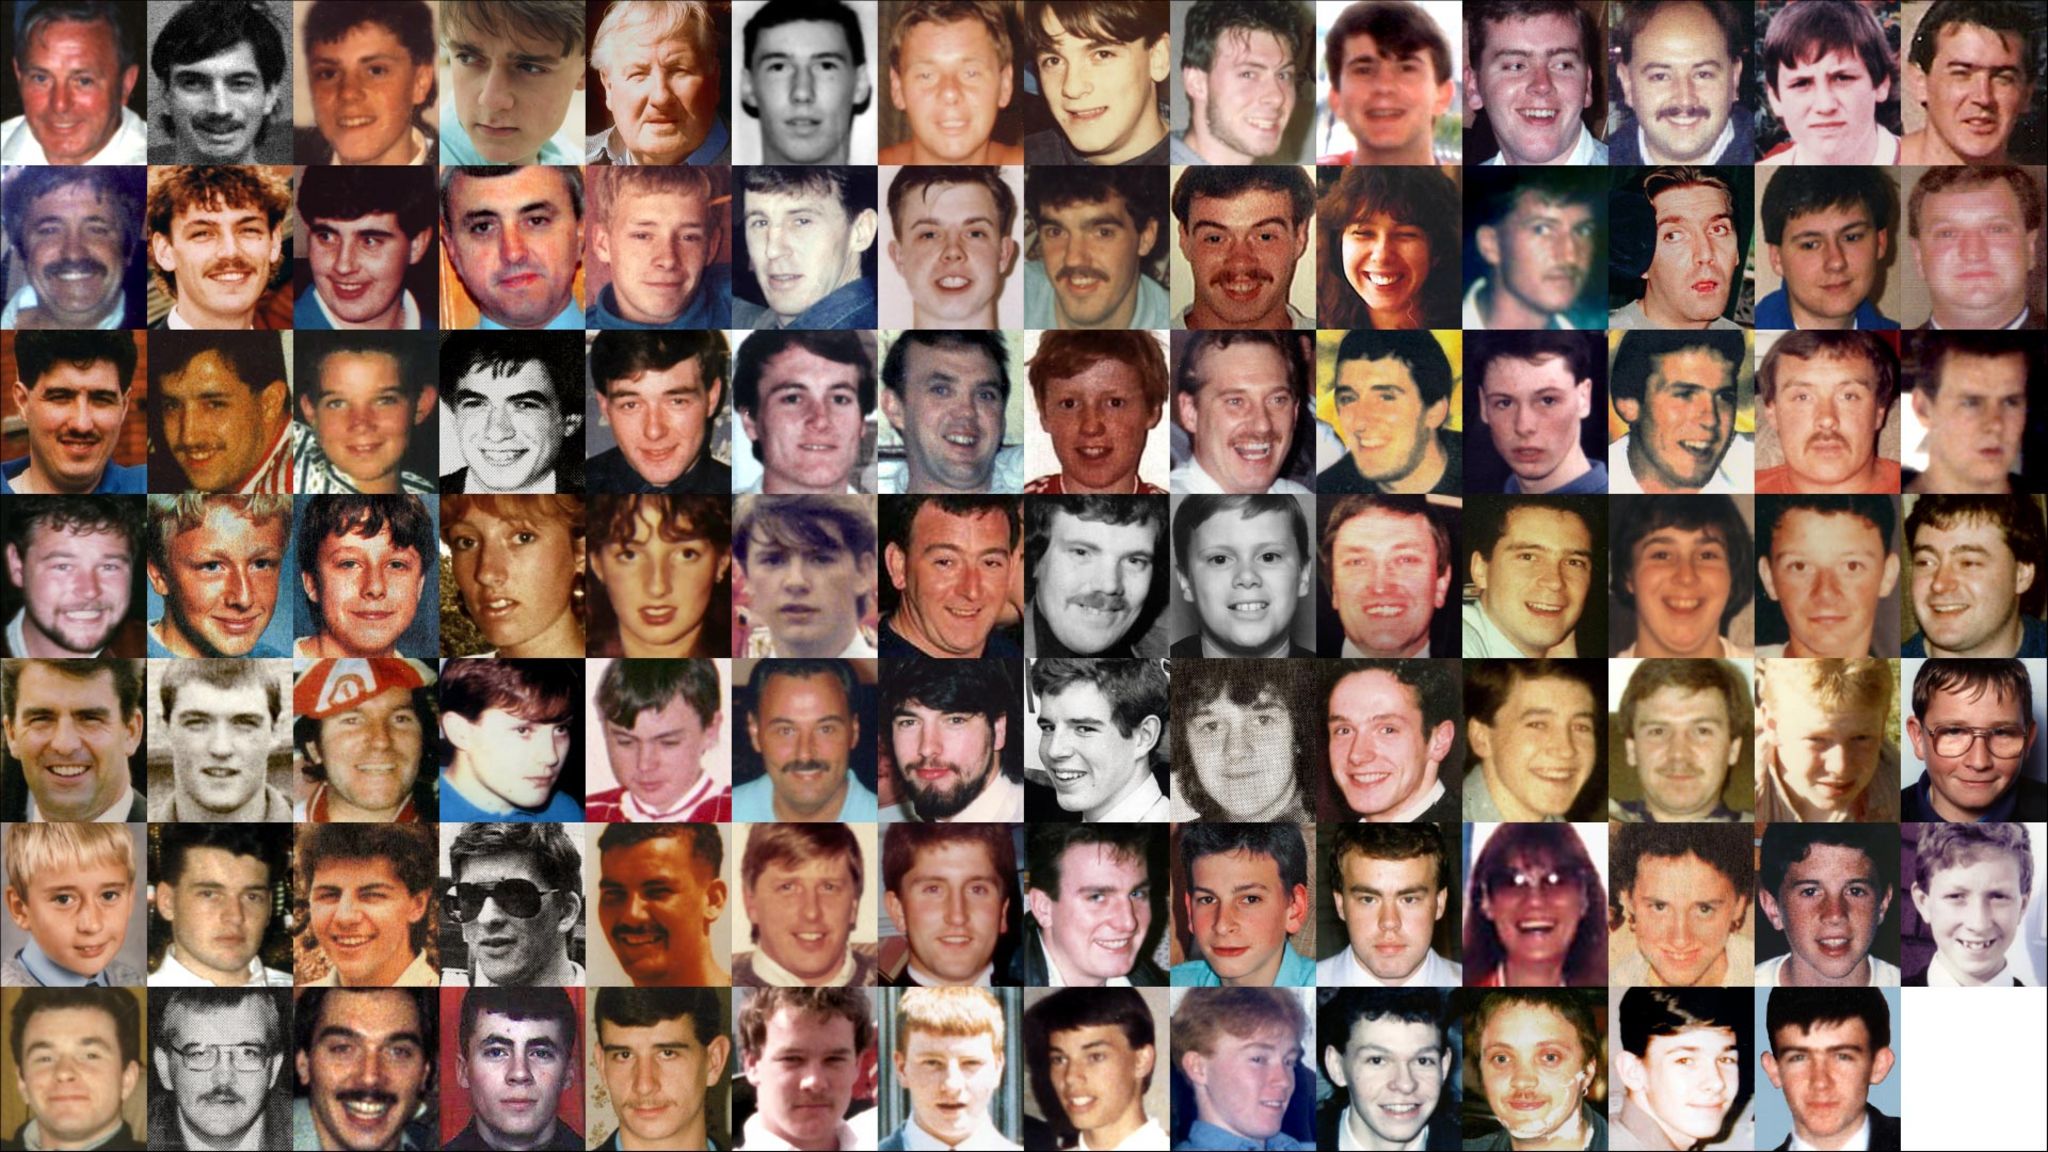 A composite image of the 97 Hillsborough disaster victims